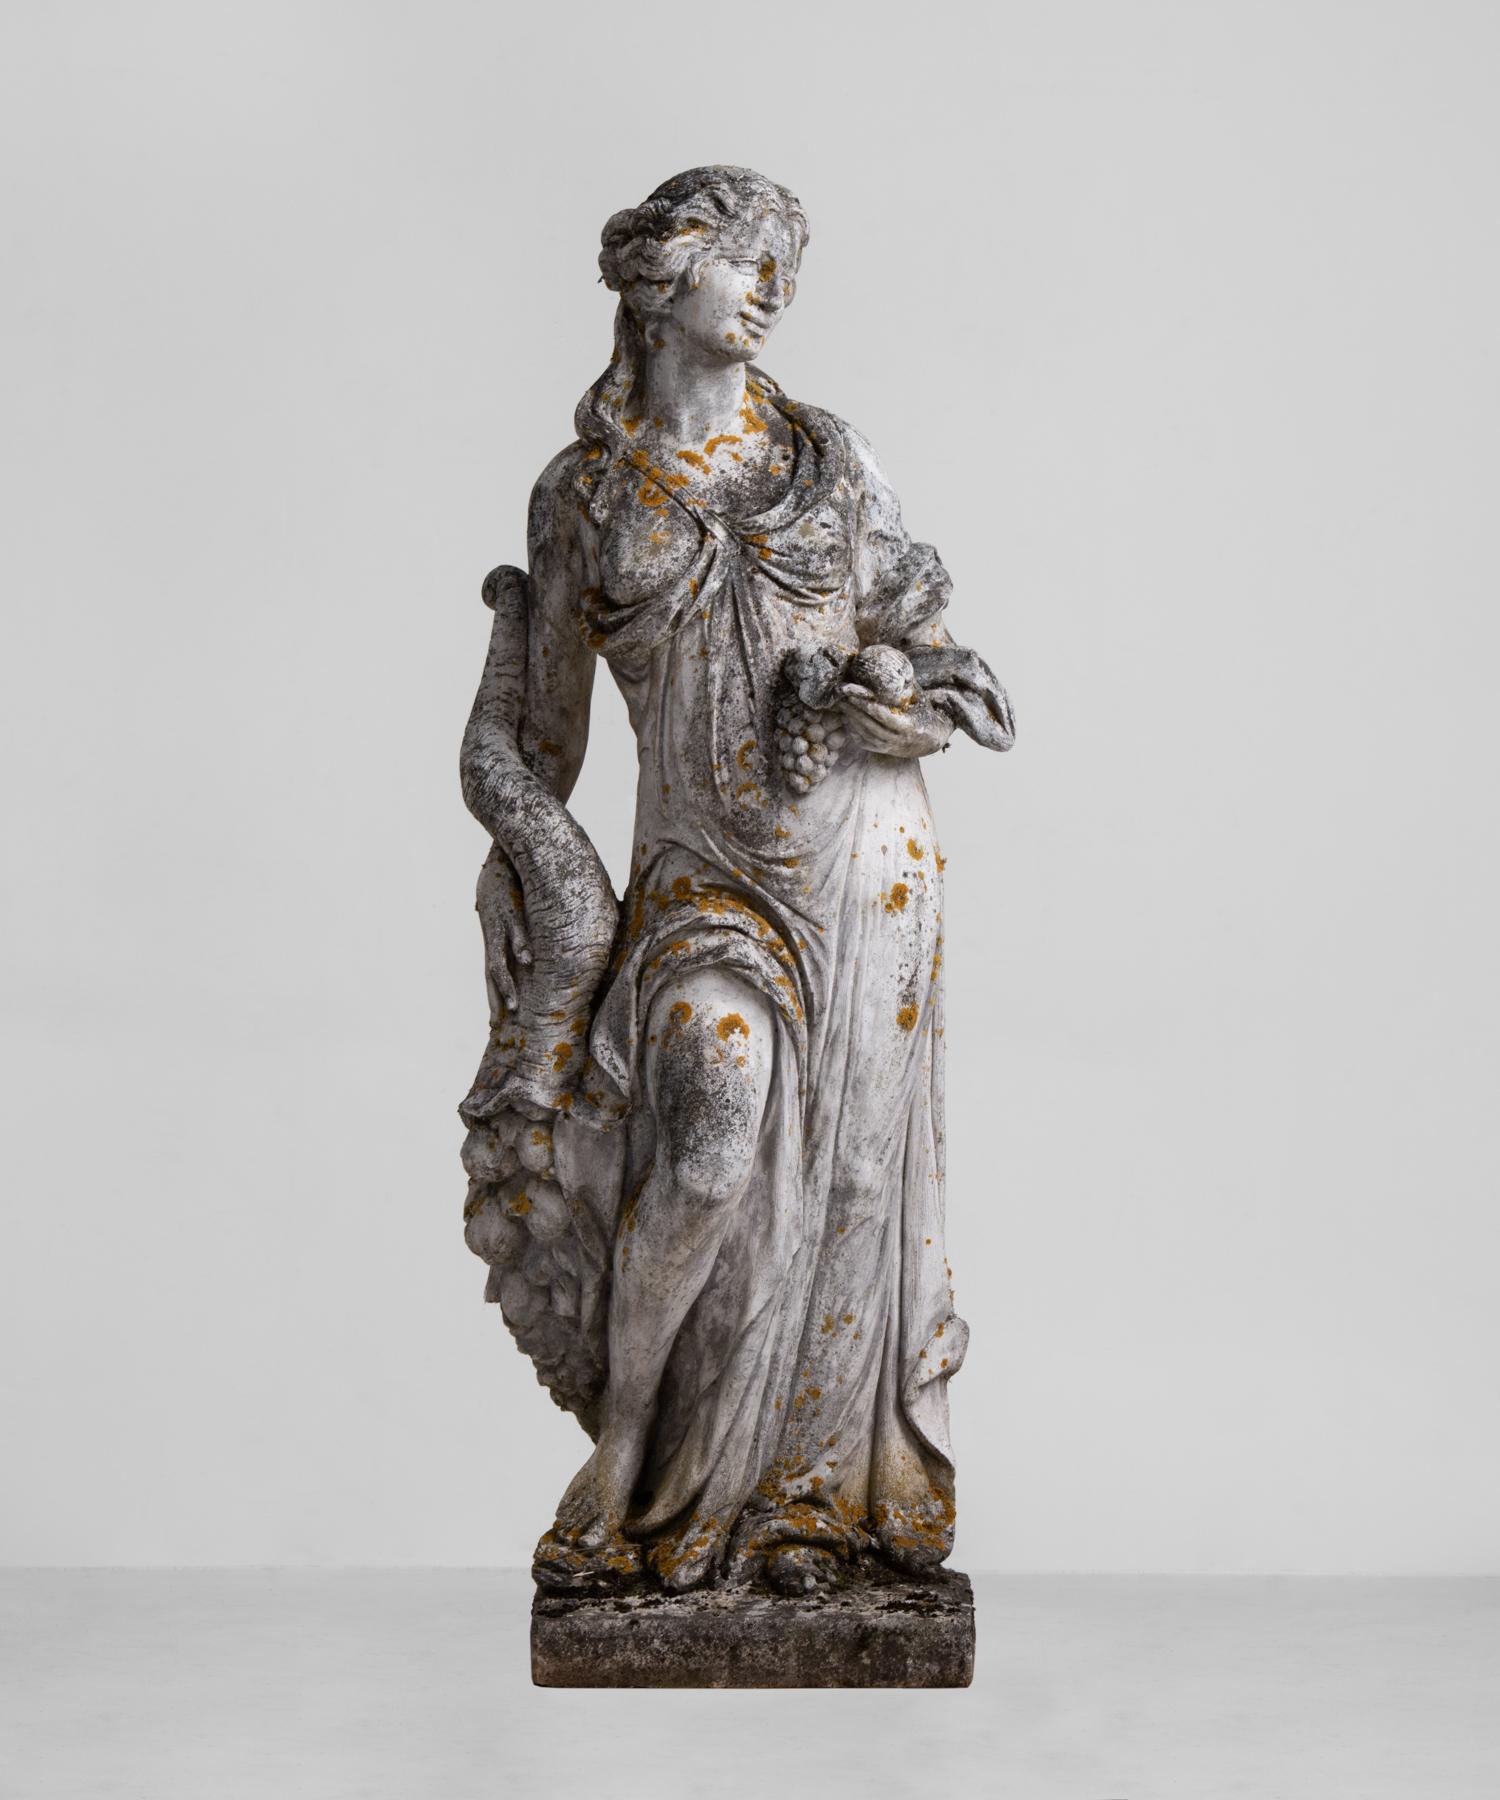 Cast stone garden statue of Demeter, England, circa 1950.

Larger than life composite stone sculpture of the goddess Demeter, with amazing patina.